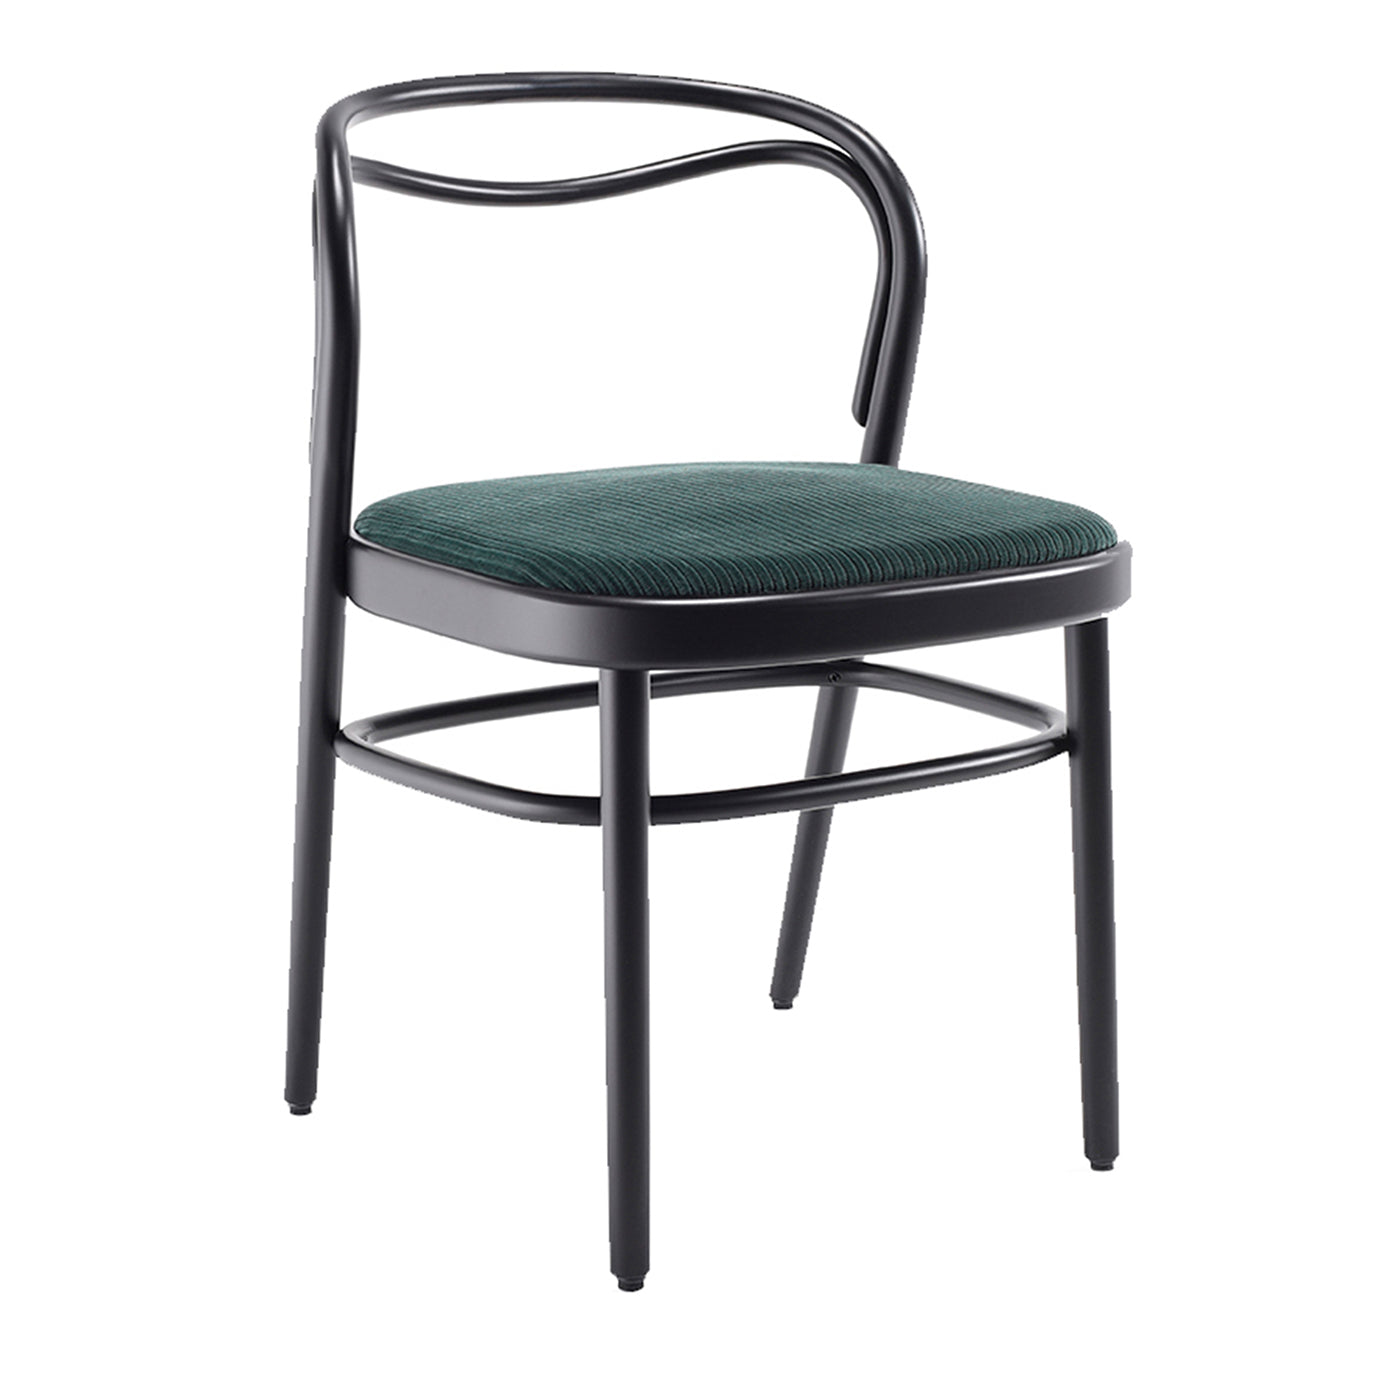 BEAULIEU chair with upholstered seat by PHILIPPE NIGRO - Main view